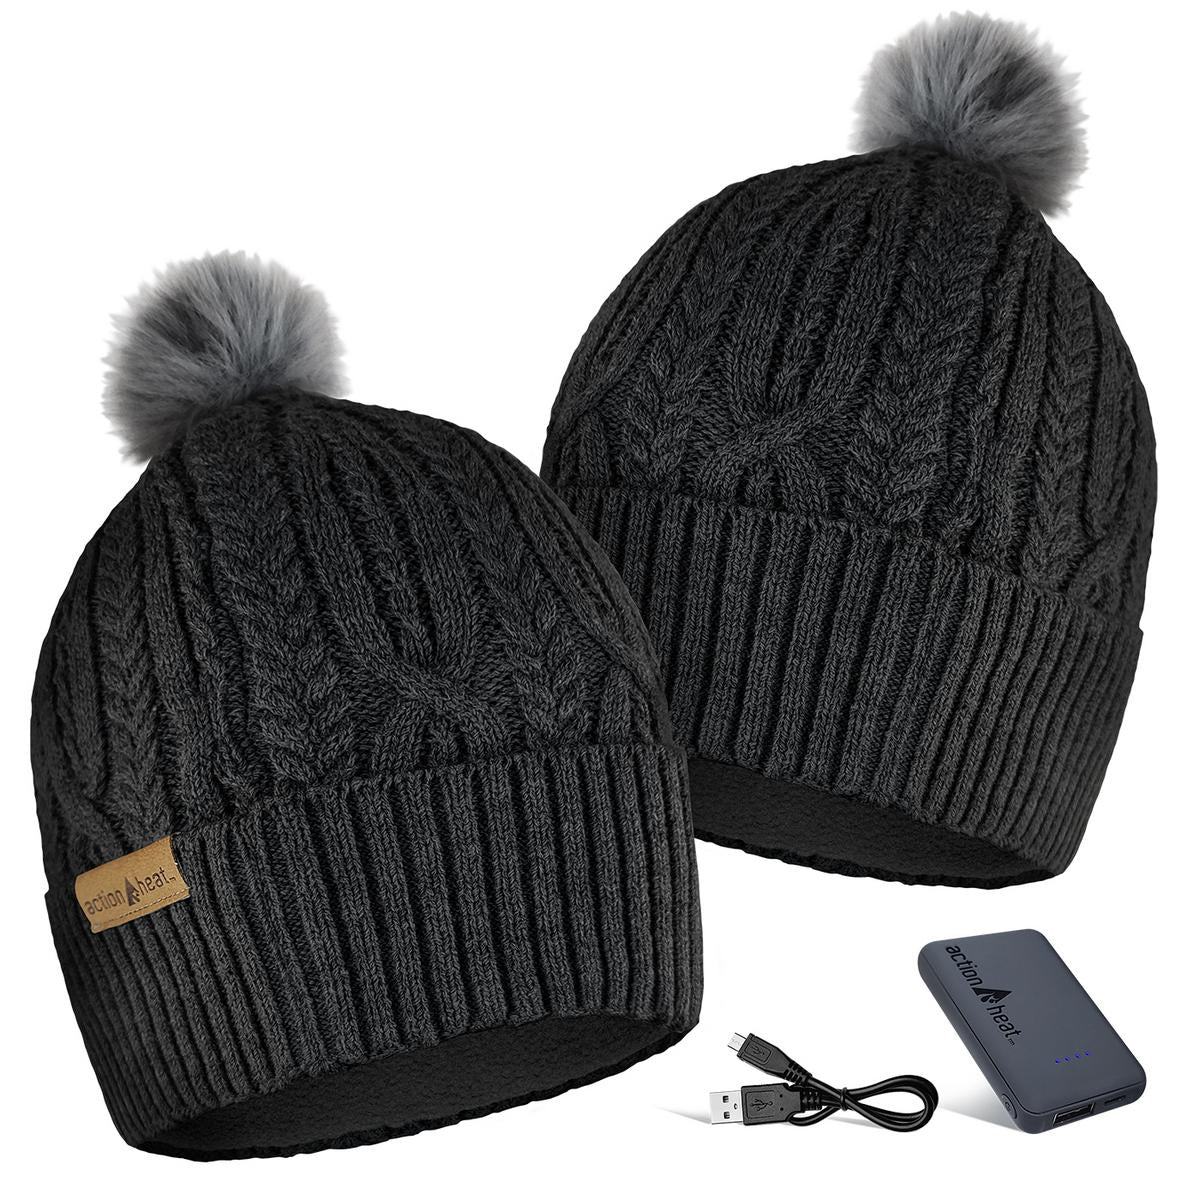 ActionHeat 5V Battery Heated Cable Knit Hat - Back